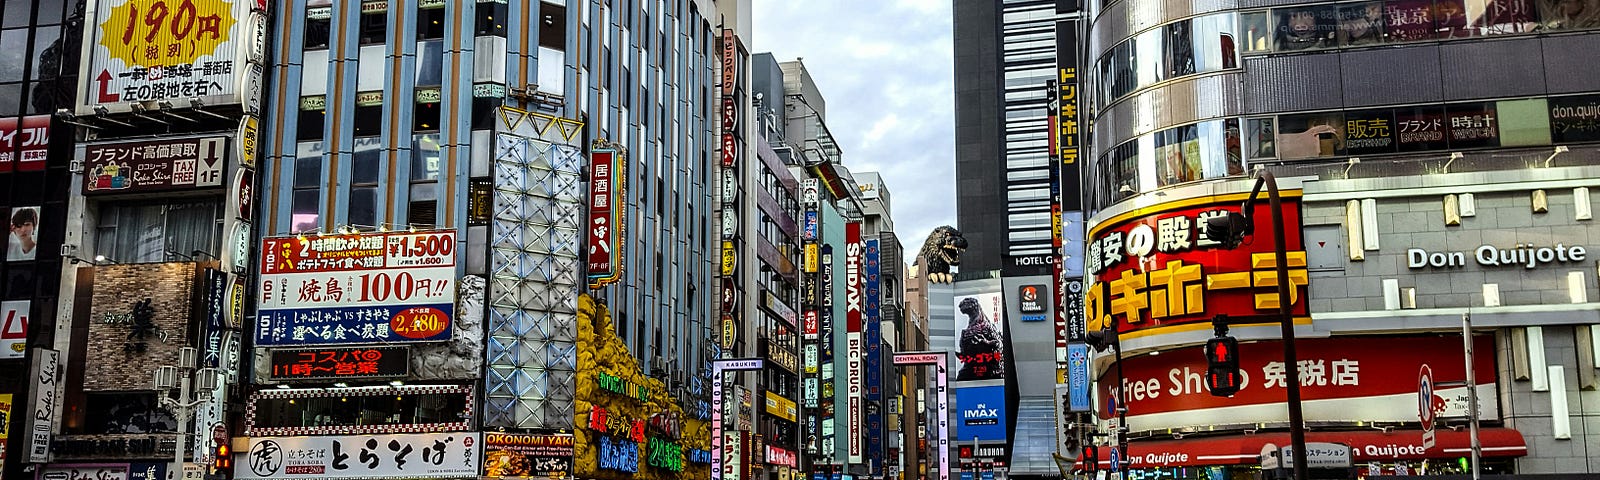 s street scene from Tokyo during the day. In the background, one of the buildings has a giant Godzilla billboard